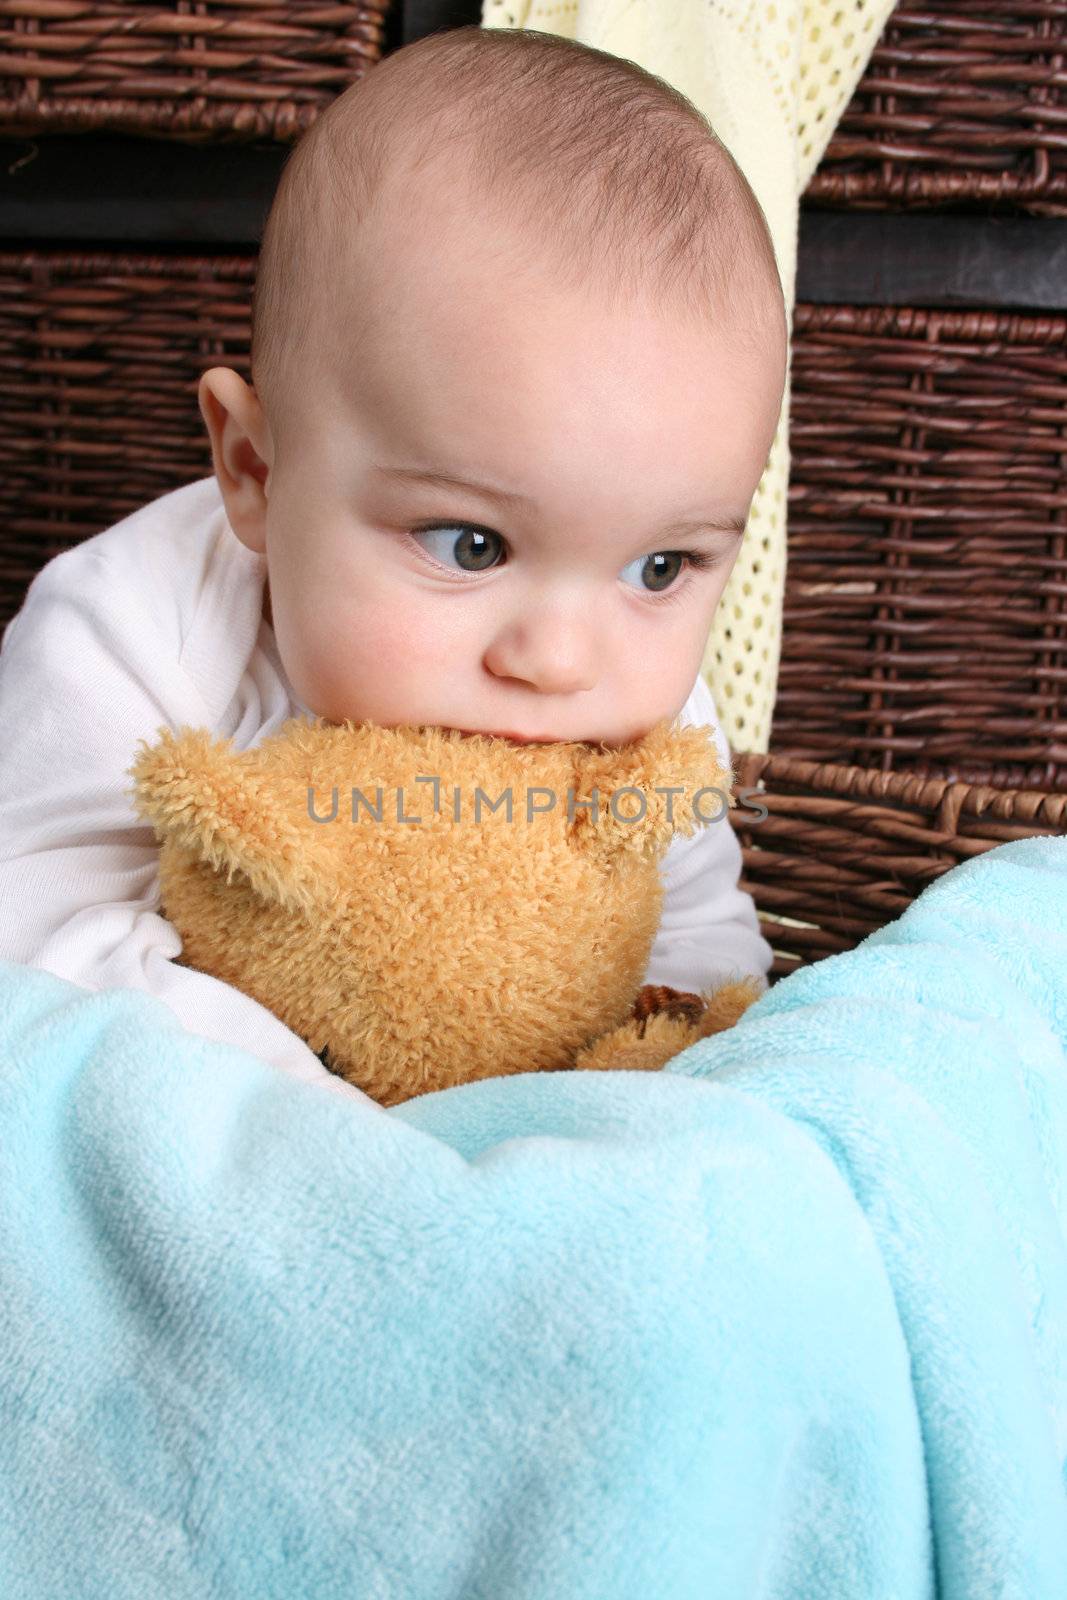 Six month old baby sitting infront of wooden drawers